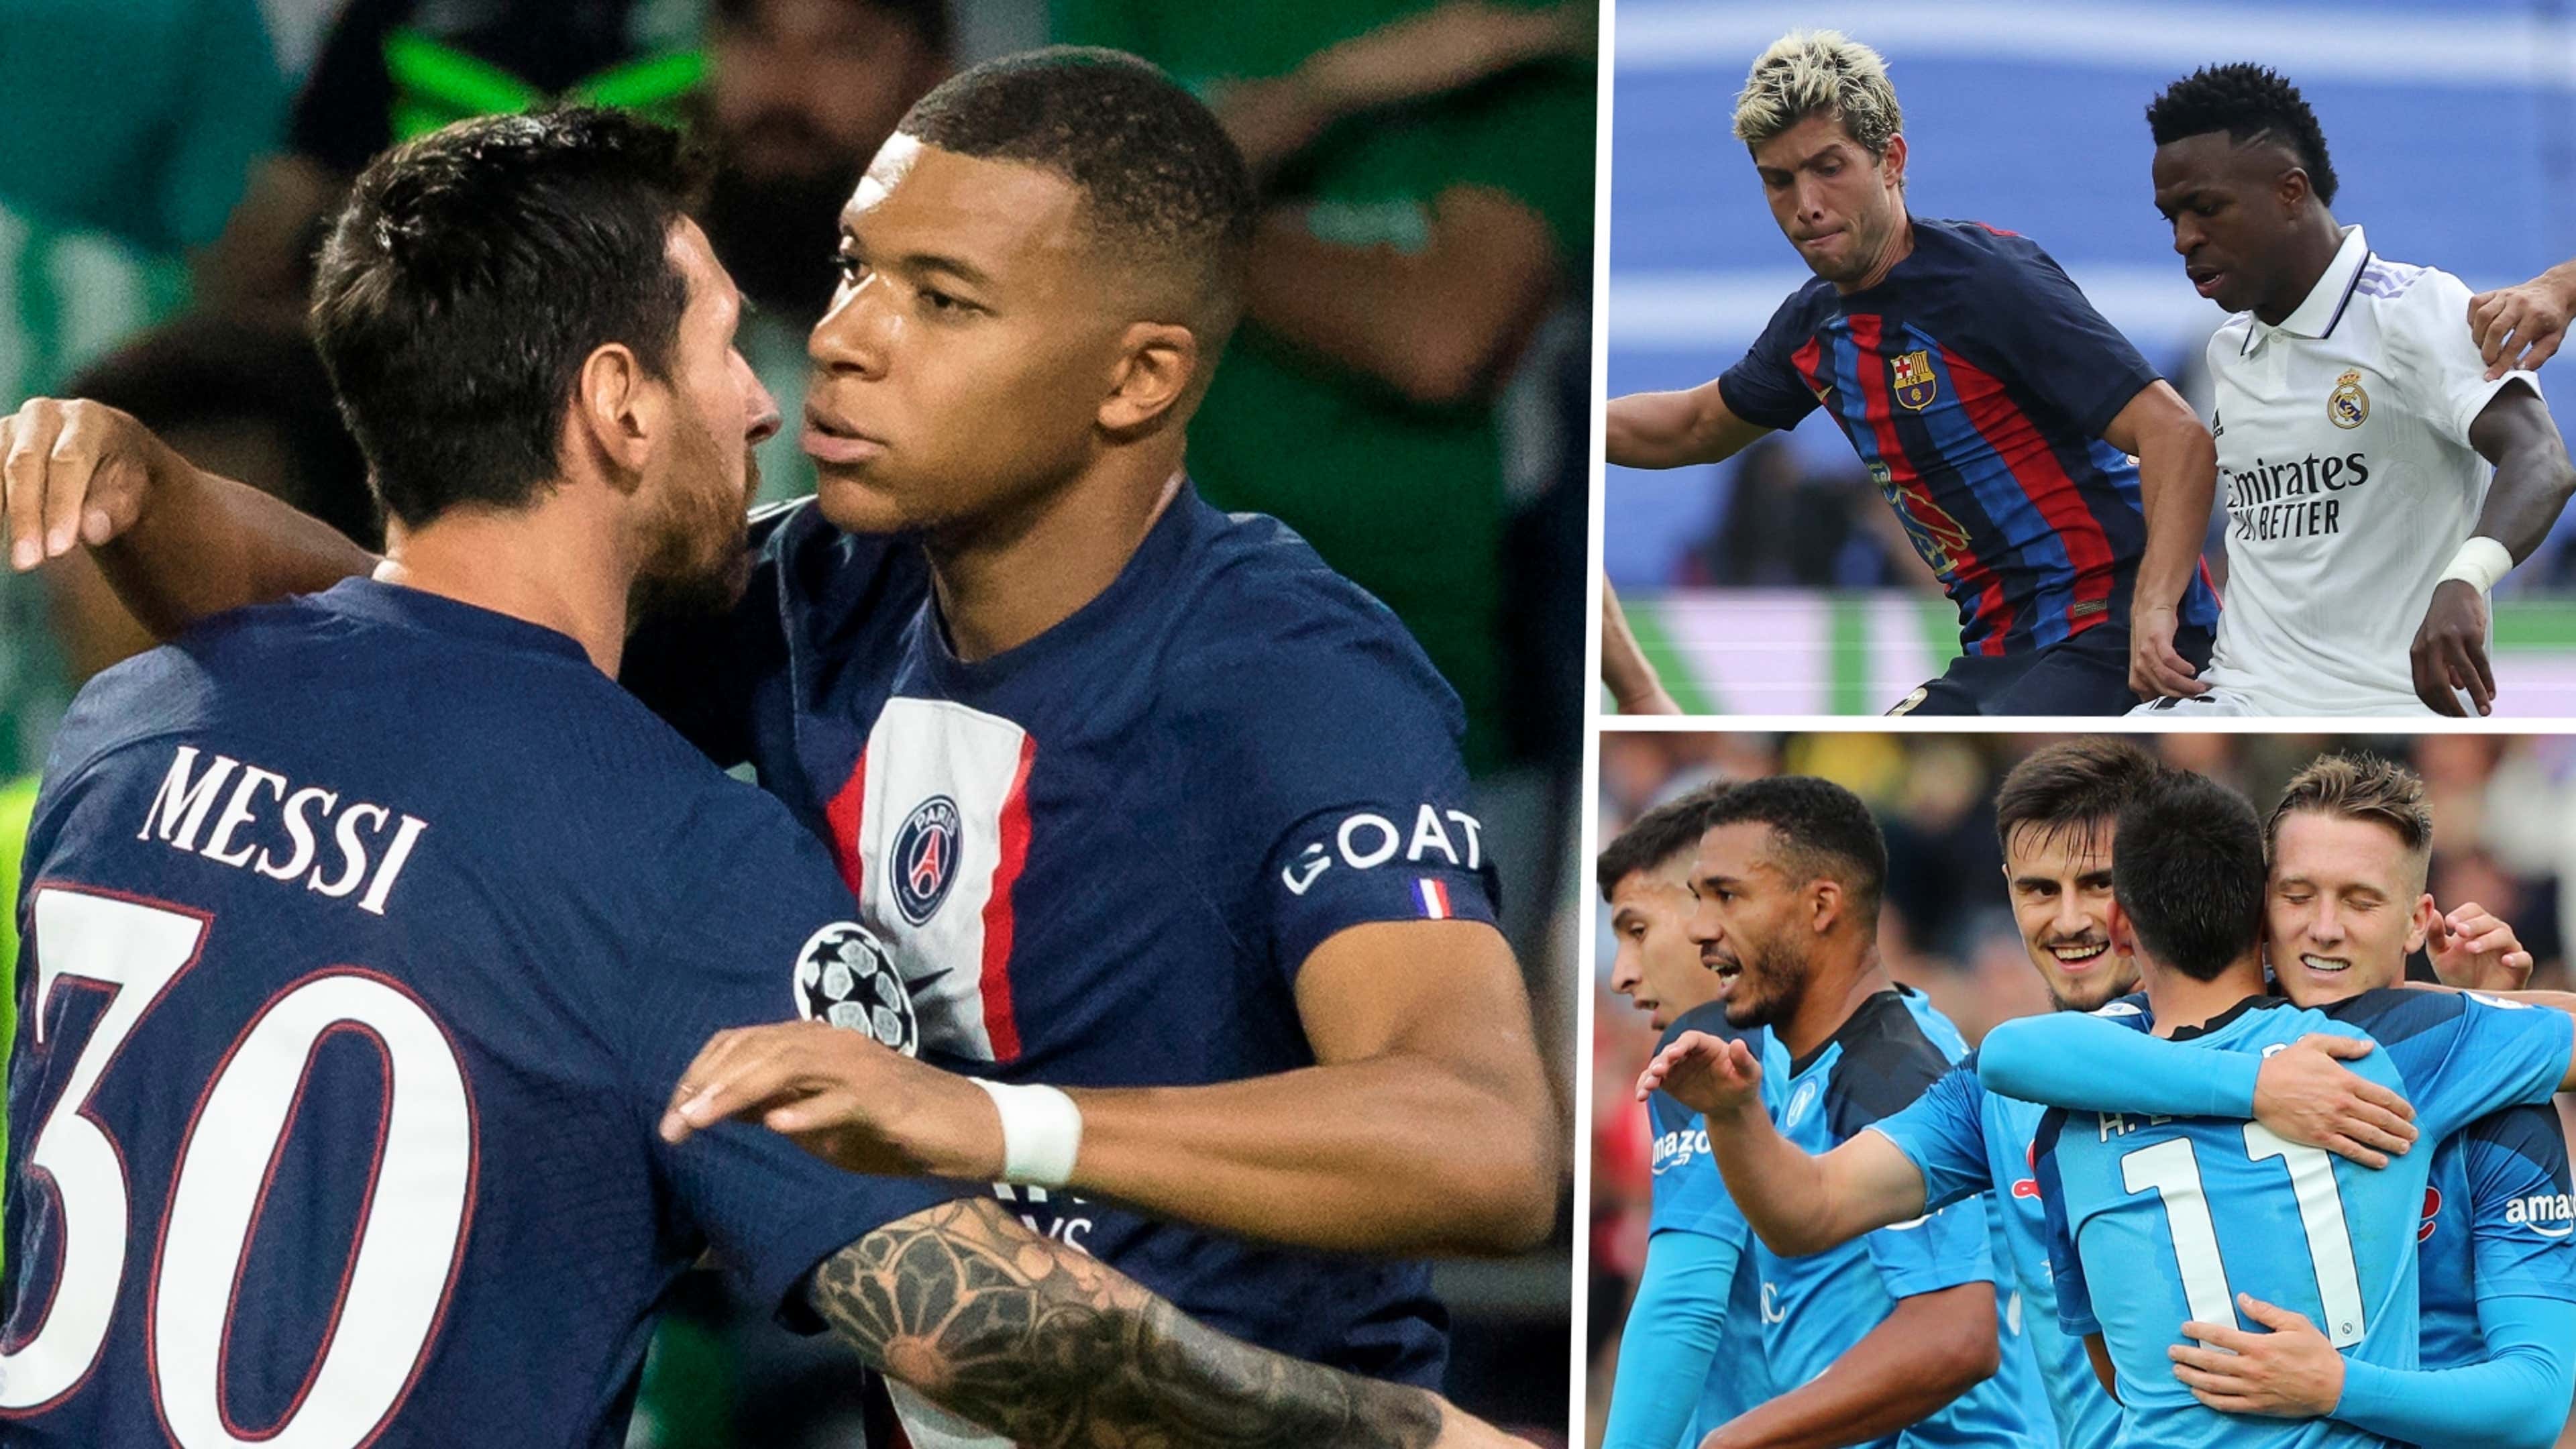 New details: Cristiano will replace Mbappe at PSG in 2022, Neymar-Messi- Ronaldo will play together - Football